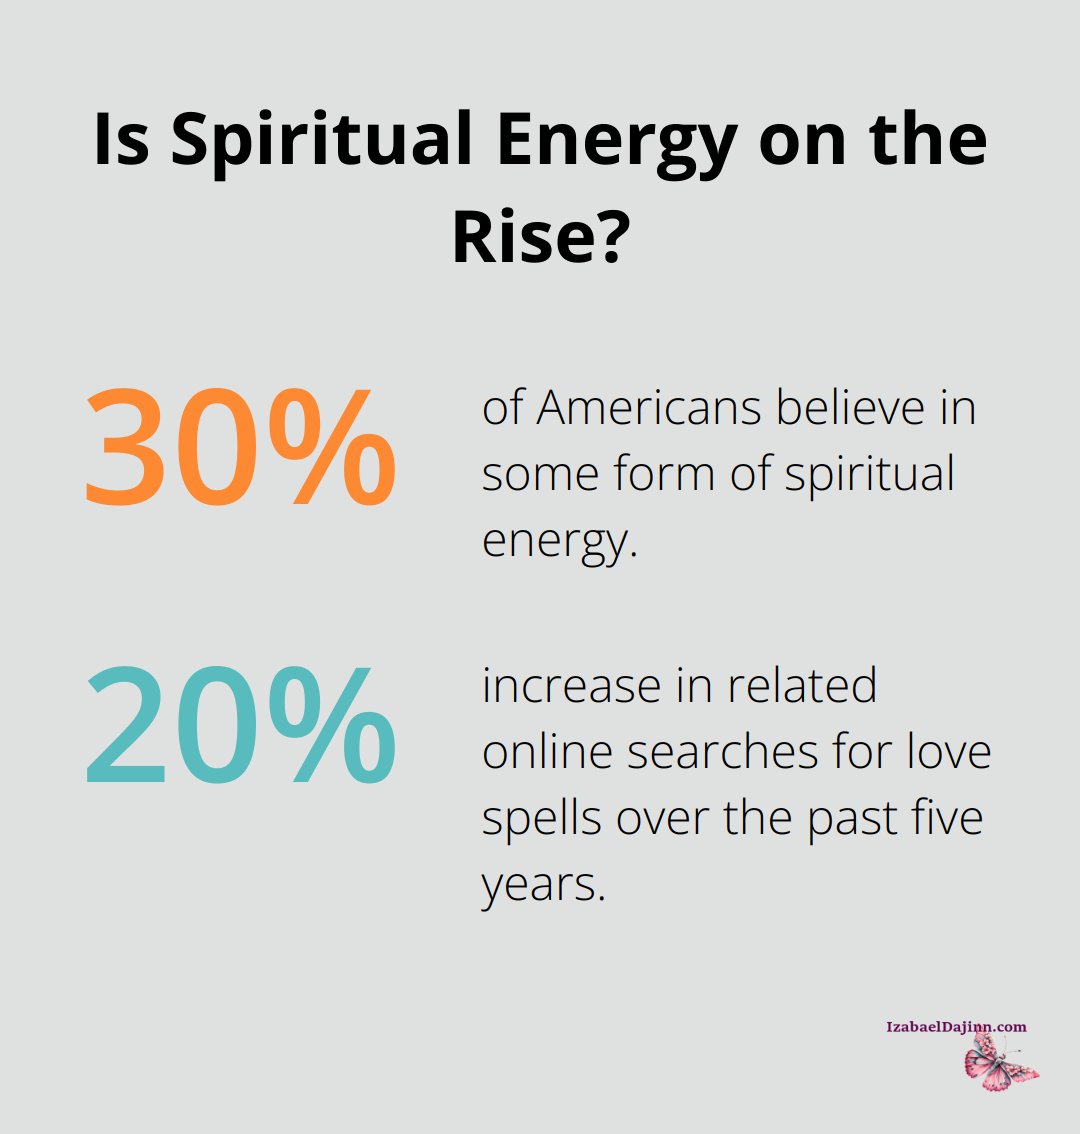 Fact - Is Spiritual Energy on the Rise?